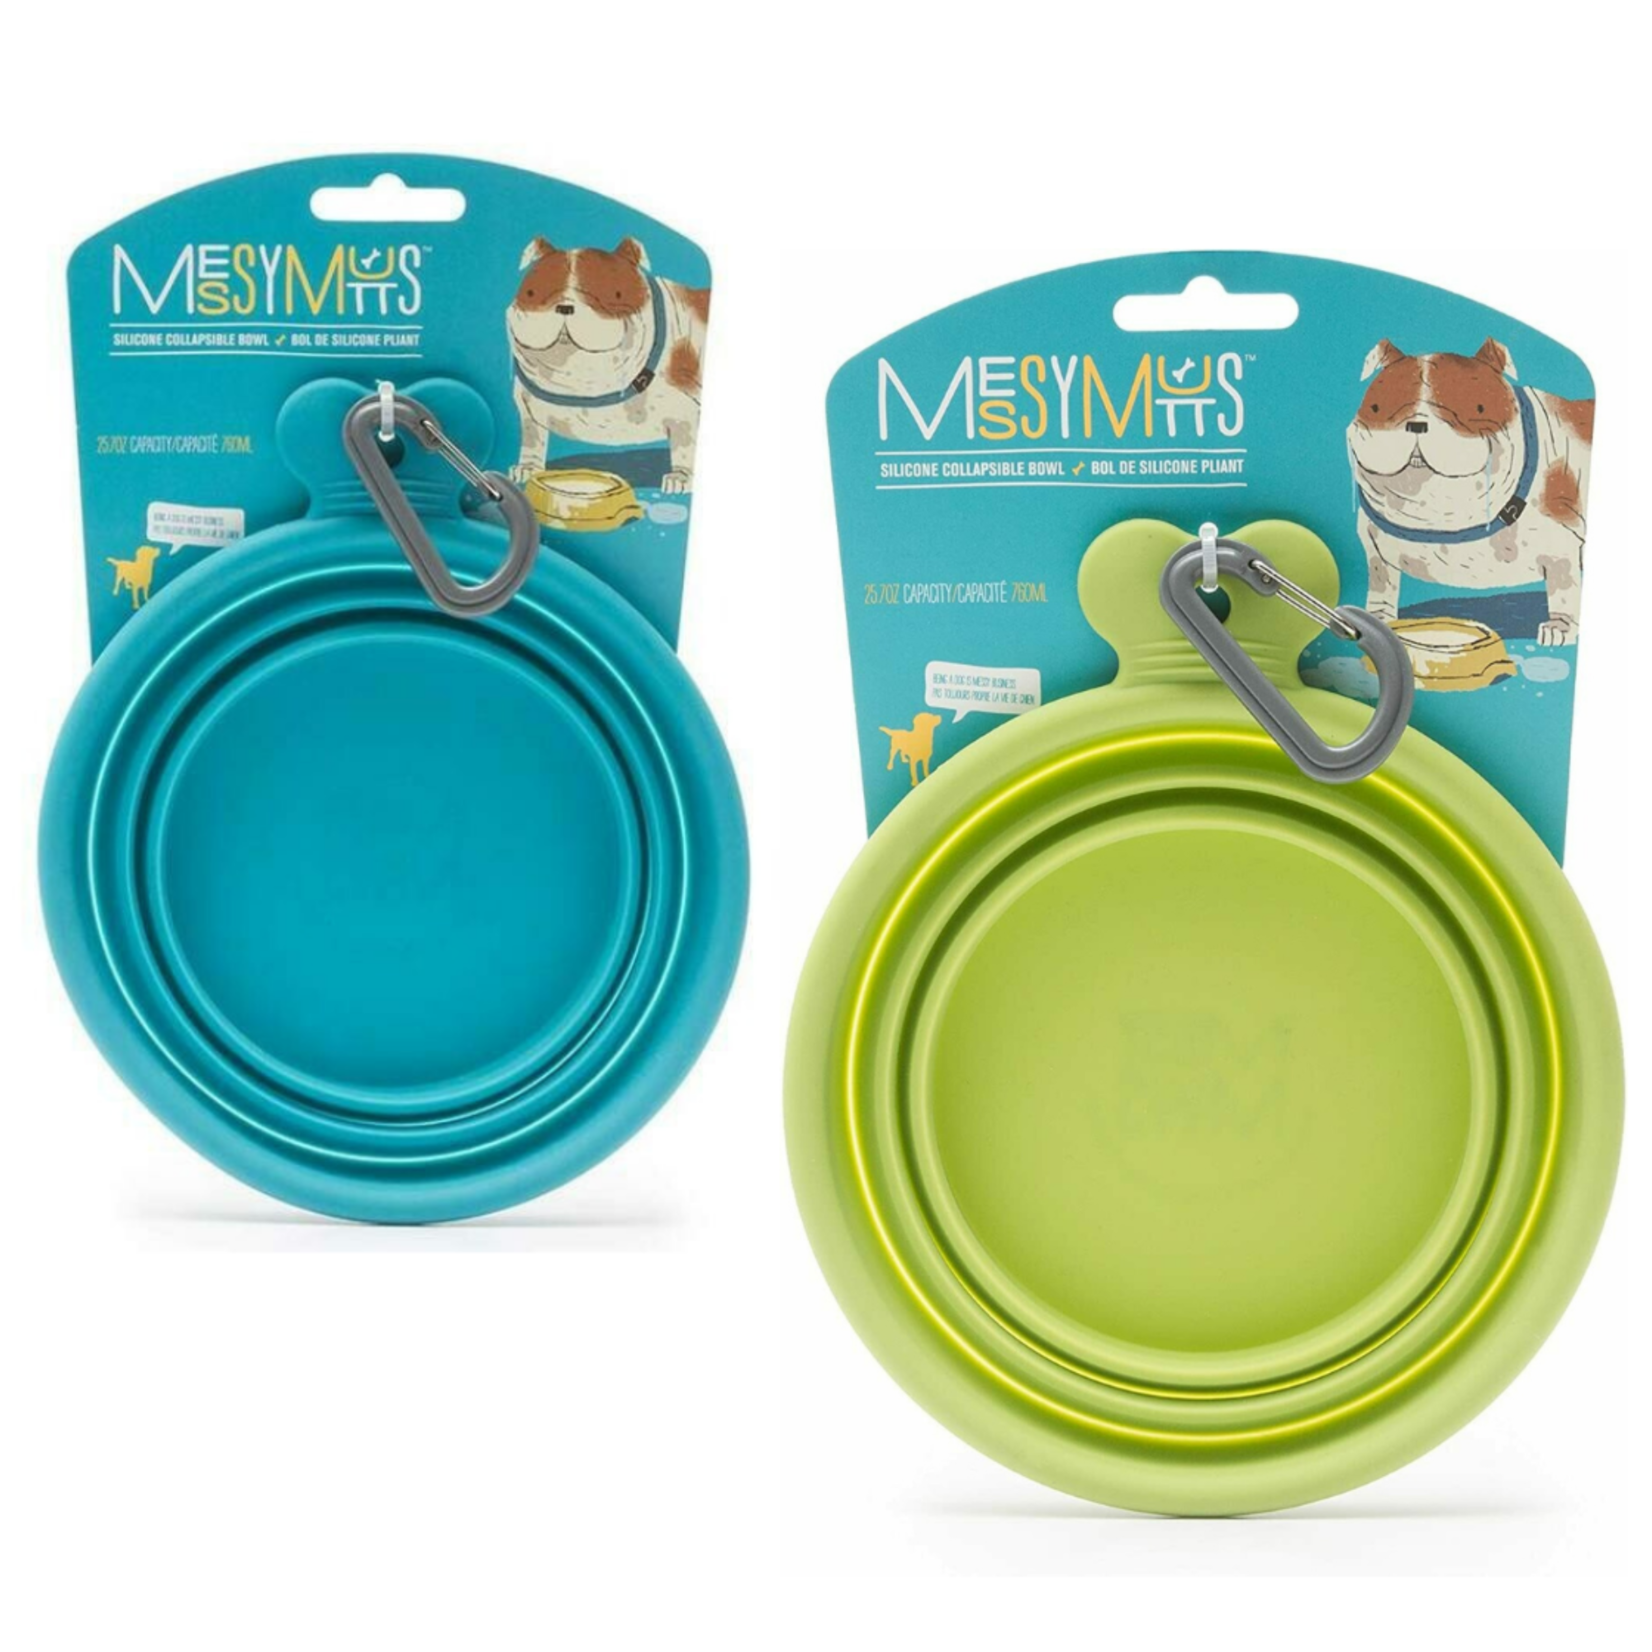 Messy Mutts Messy Mutts: Collapsible Travel Bowl